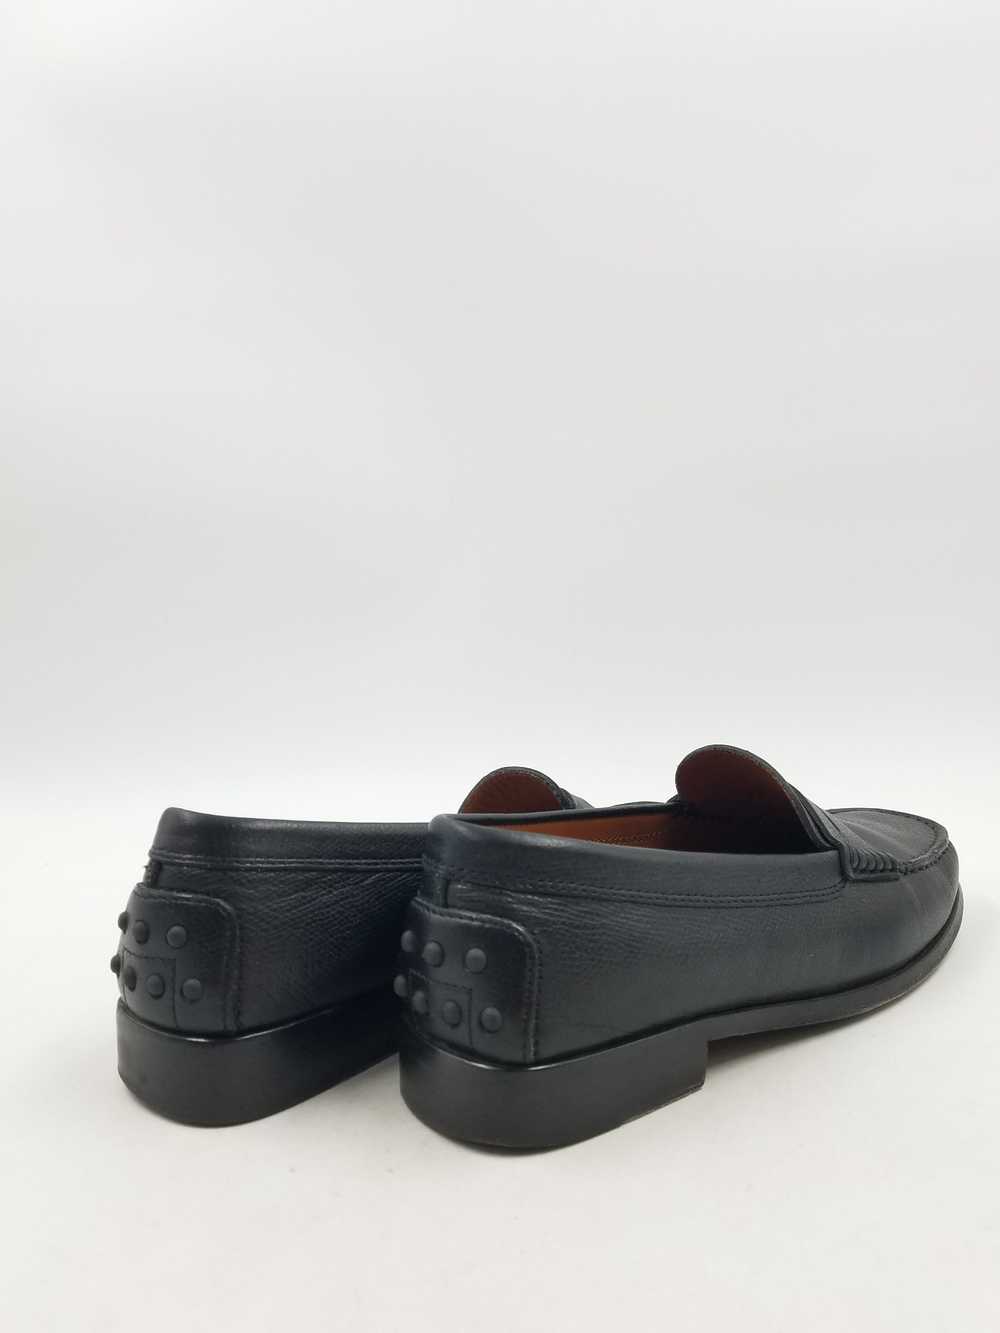 Tod's Black Penny Loafers W 6.5 COA - image 4